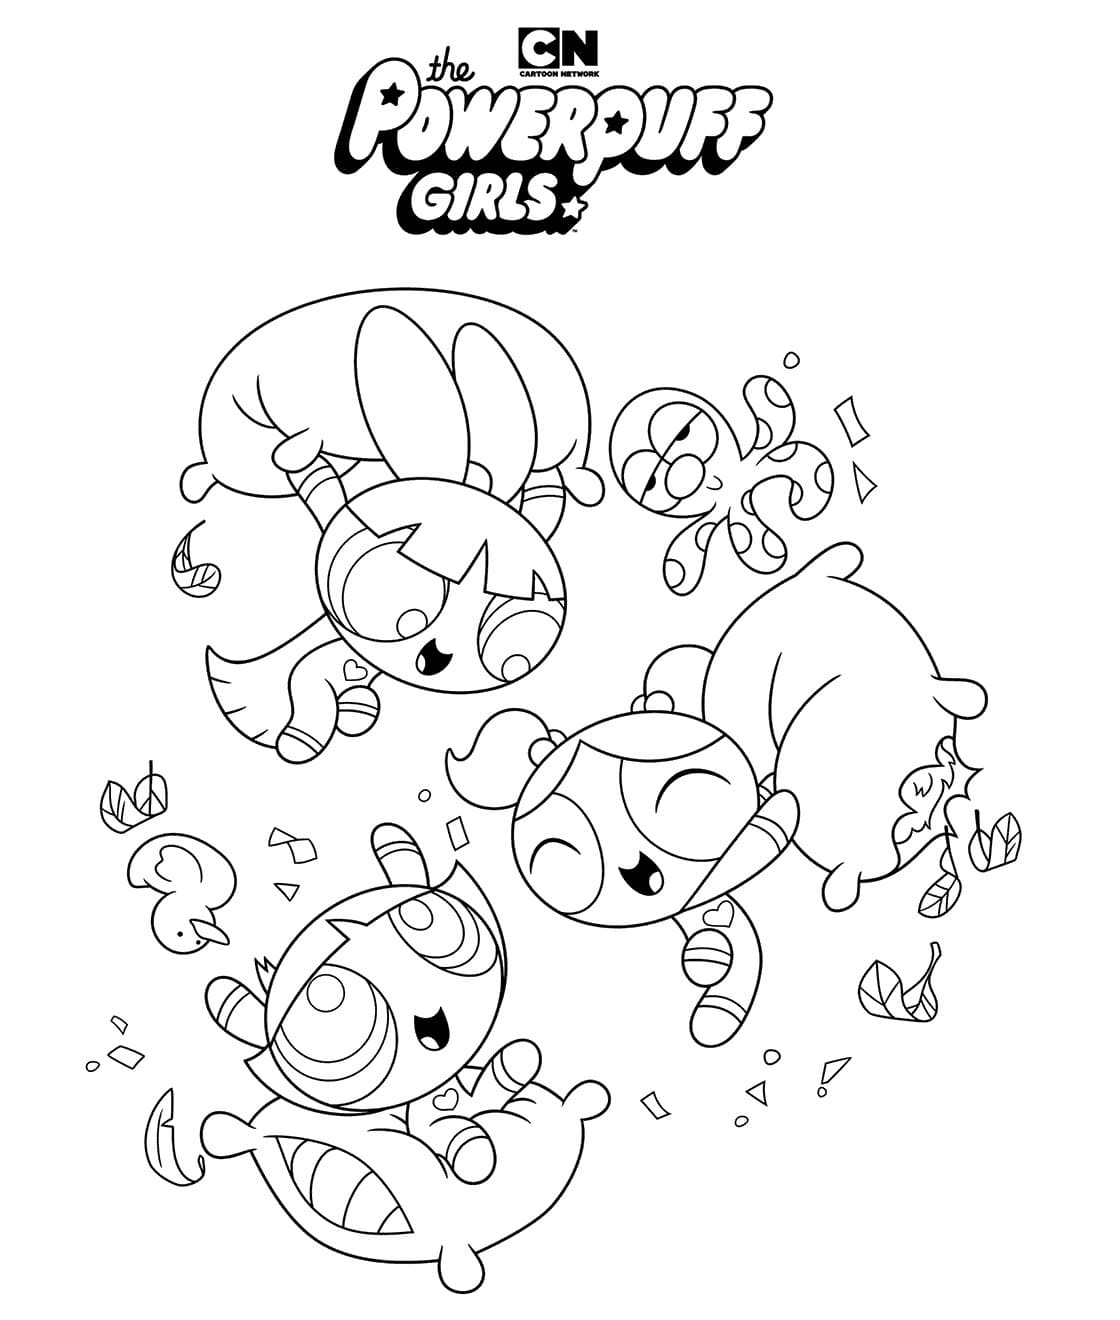 Cartoon Network Coloring Pages   18 Free Coloring pages